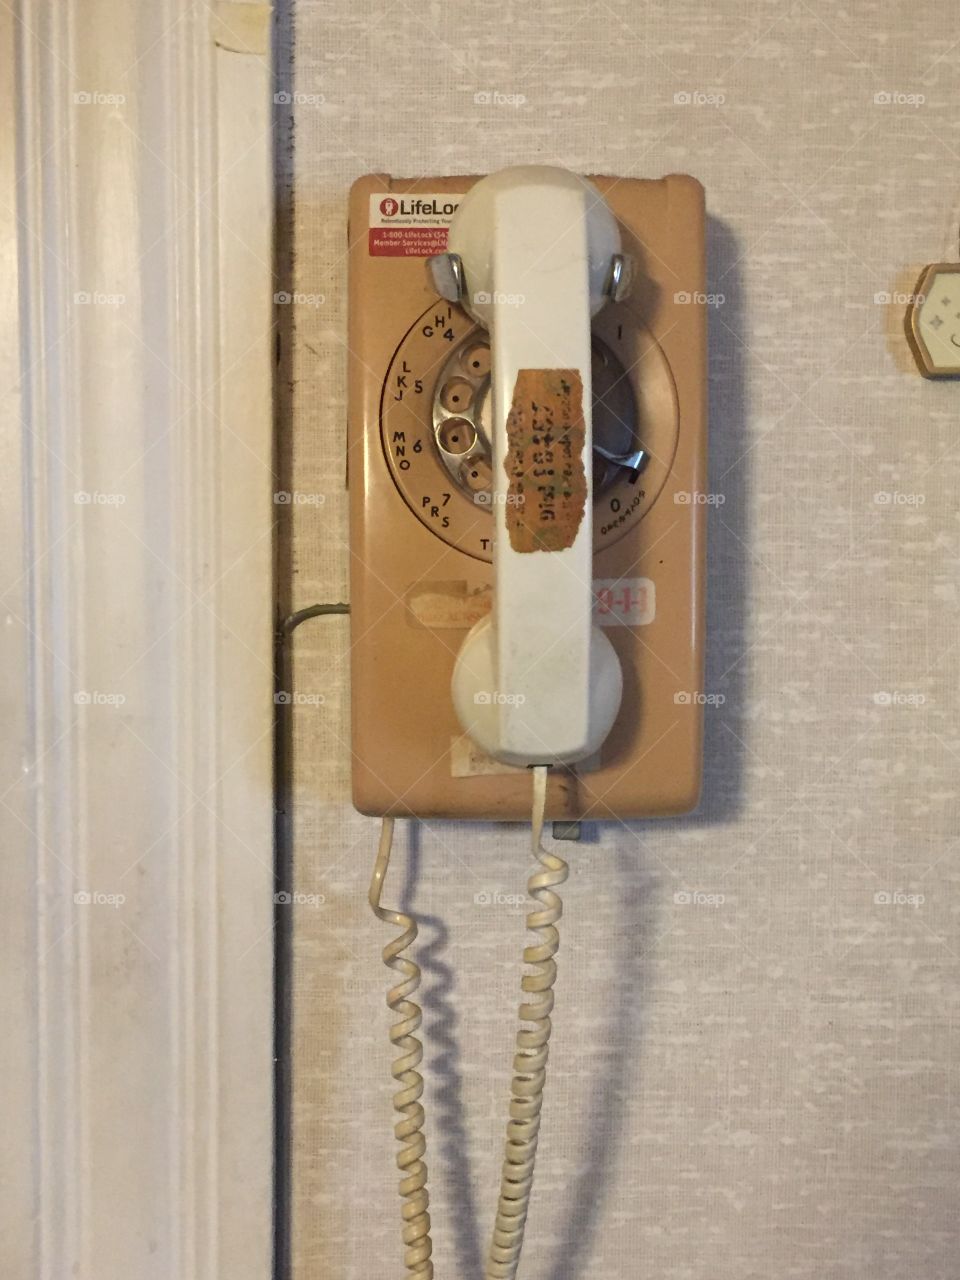 Rotary phone at my cousin's place, shown here with the phone on its hook. I like older objects.